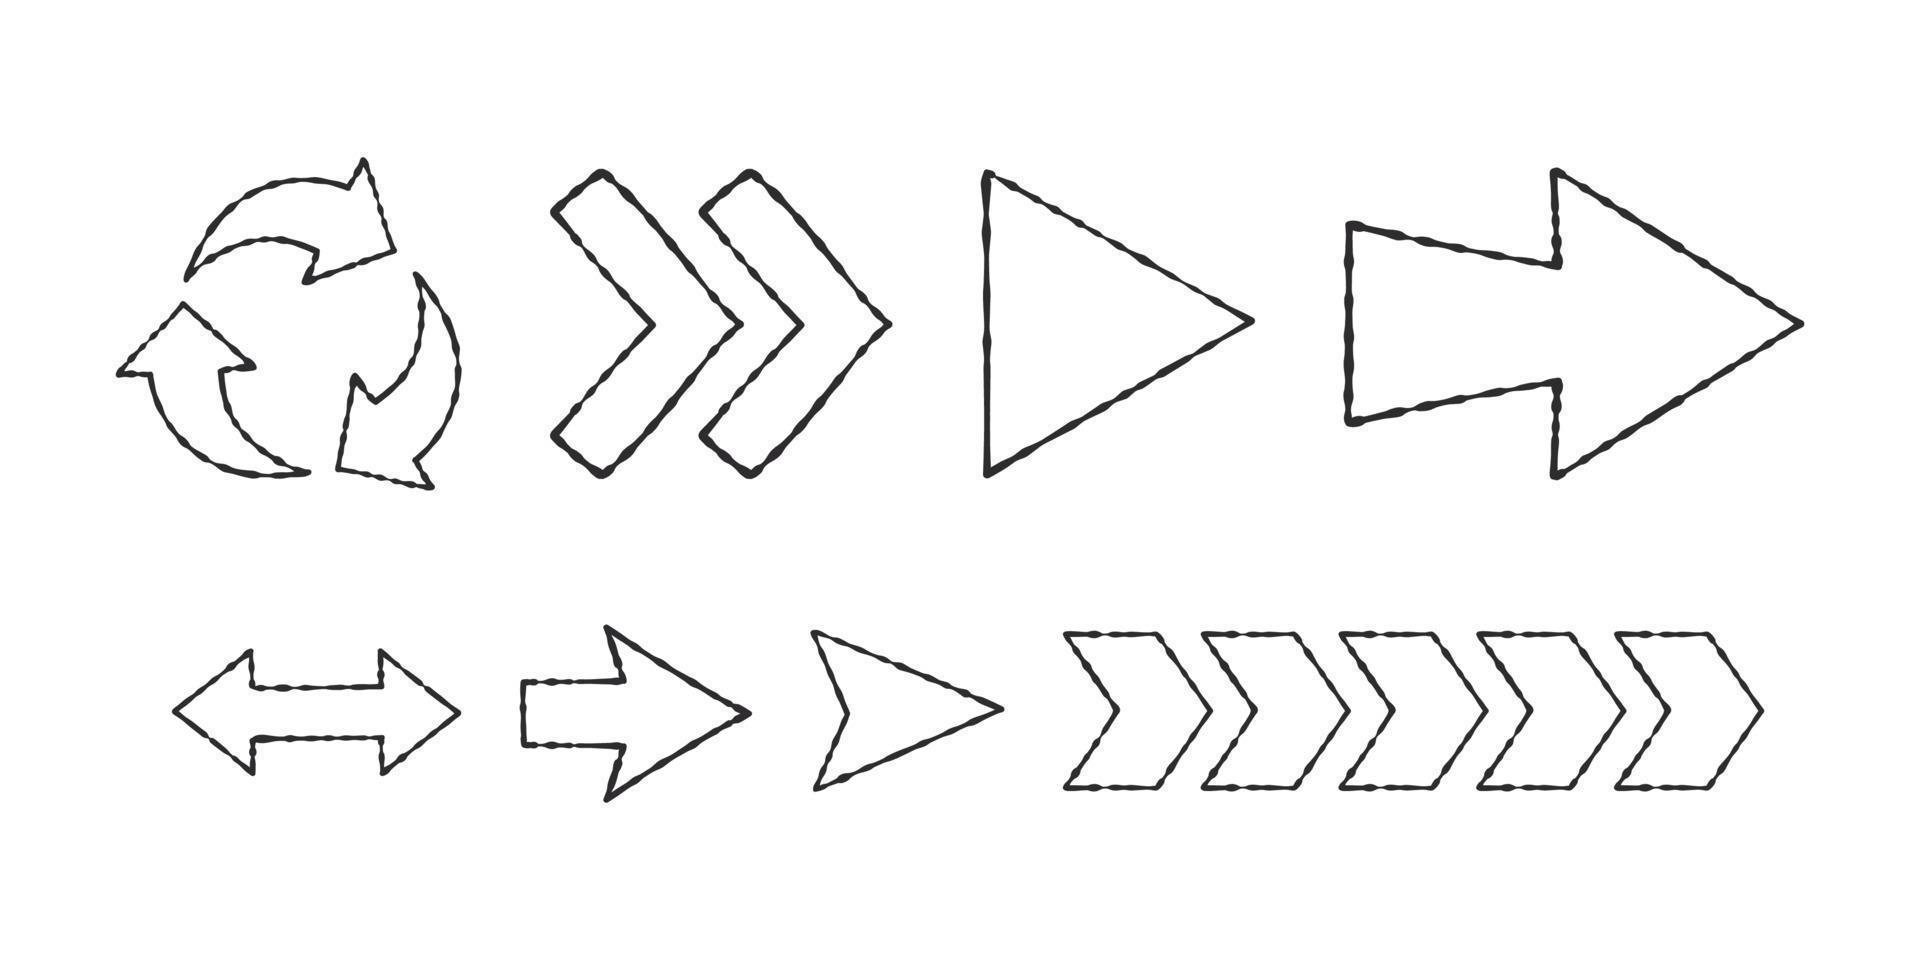 Arrows icons set. Sketch arrows drawn by hand. Vector icons